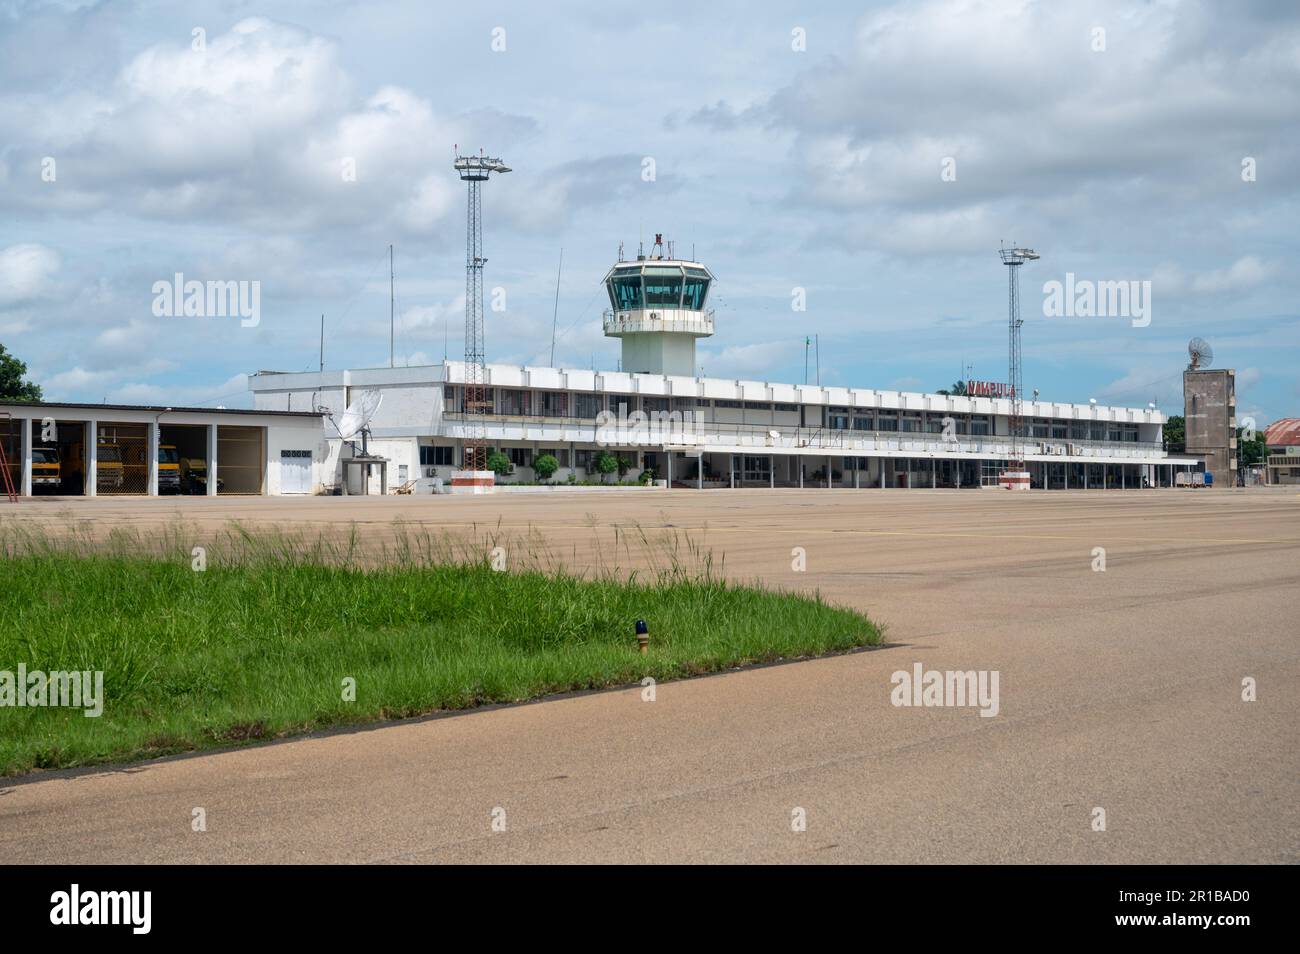 Nampula, Mozambique. Airport terminal of Nampula International Airport (FQNP / APL) in Mozambique. Stock Photo